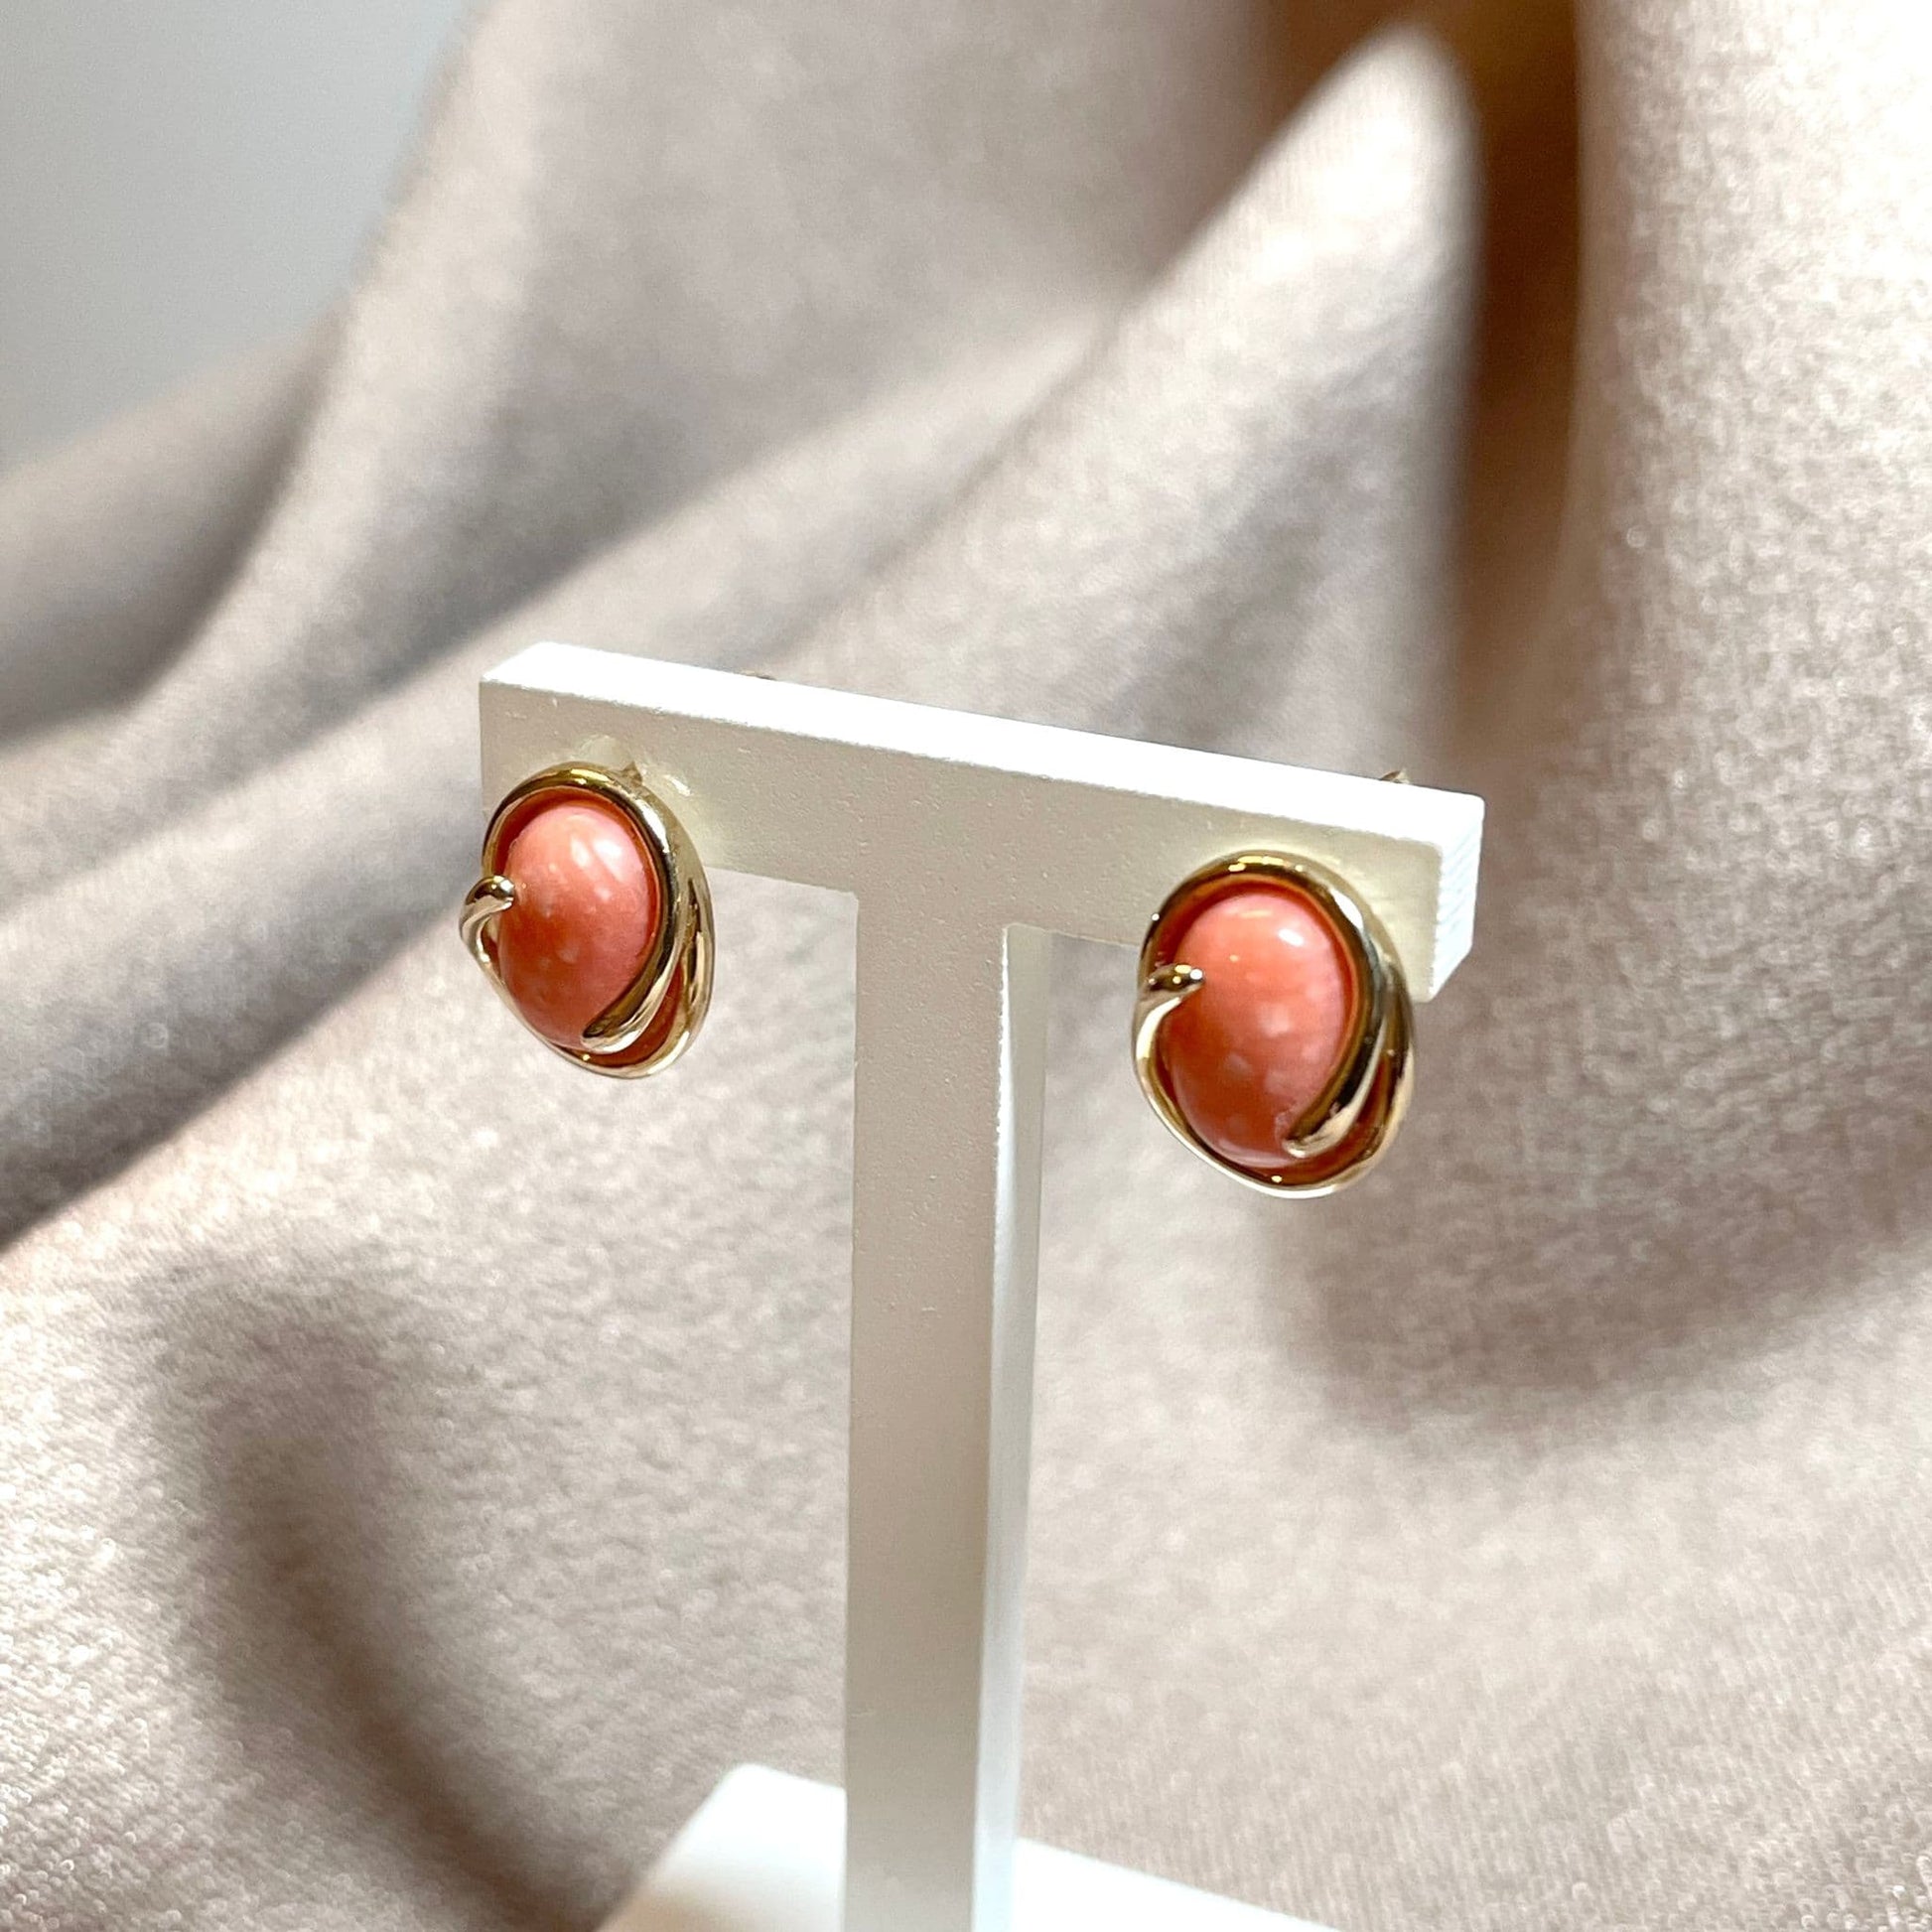 Coral yellow gold oval stud earrings